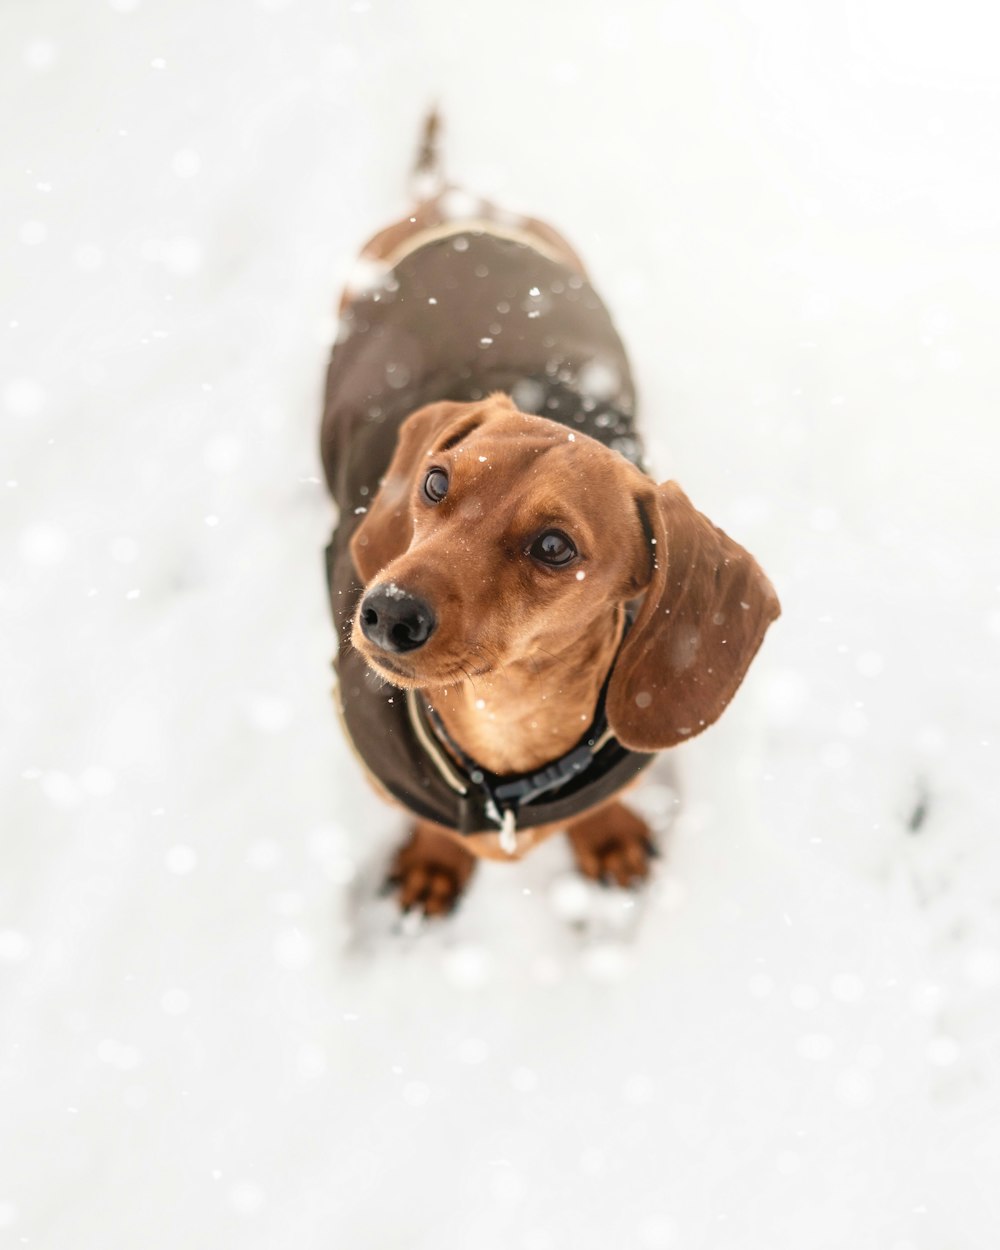 brown dachshund on snow covered ground during daytime